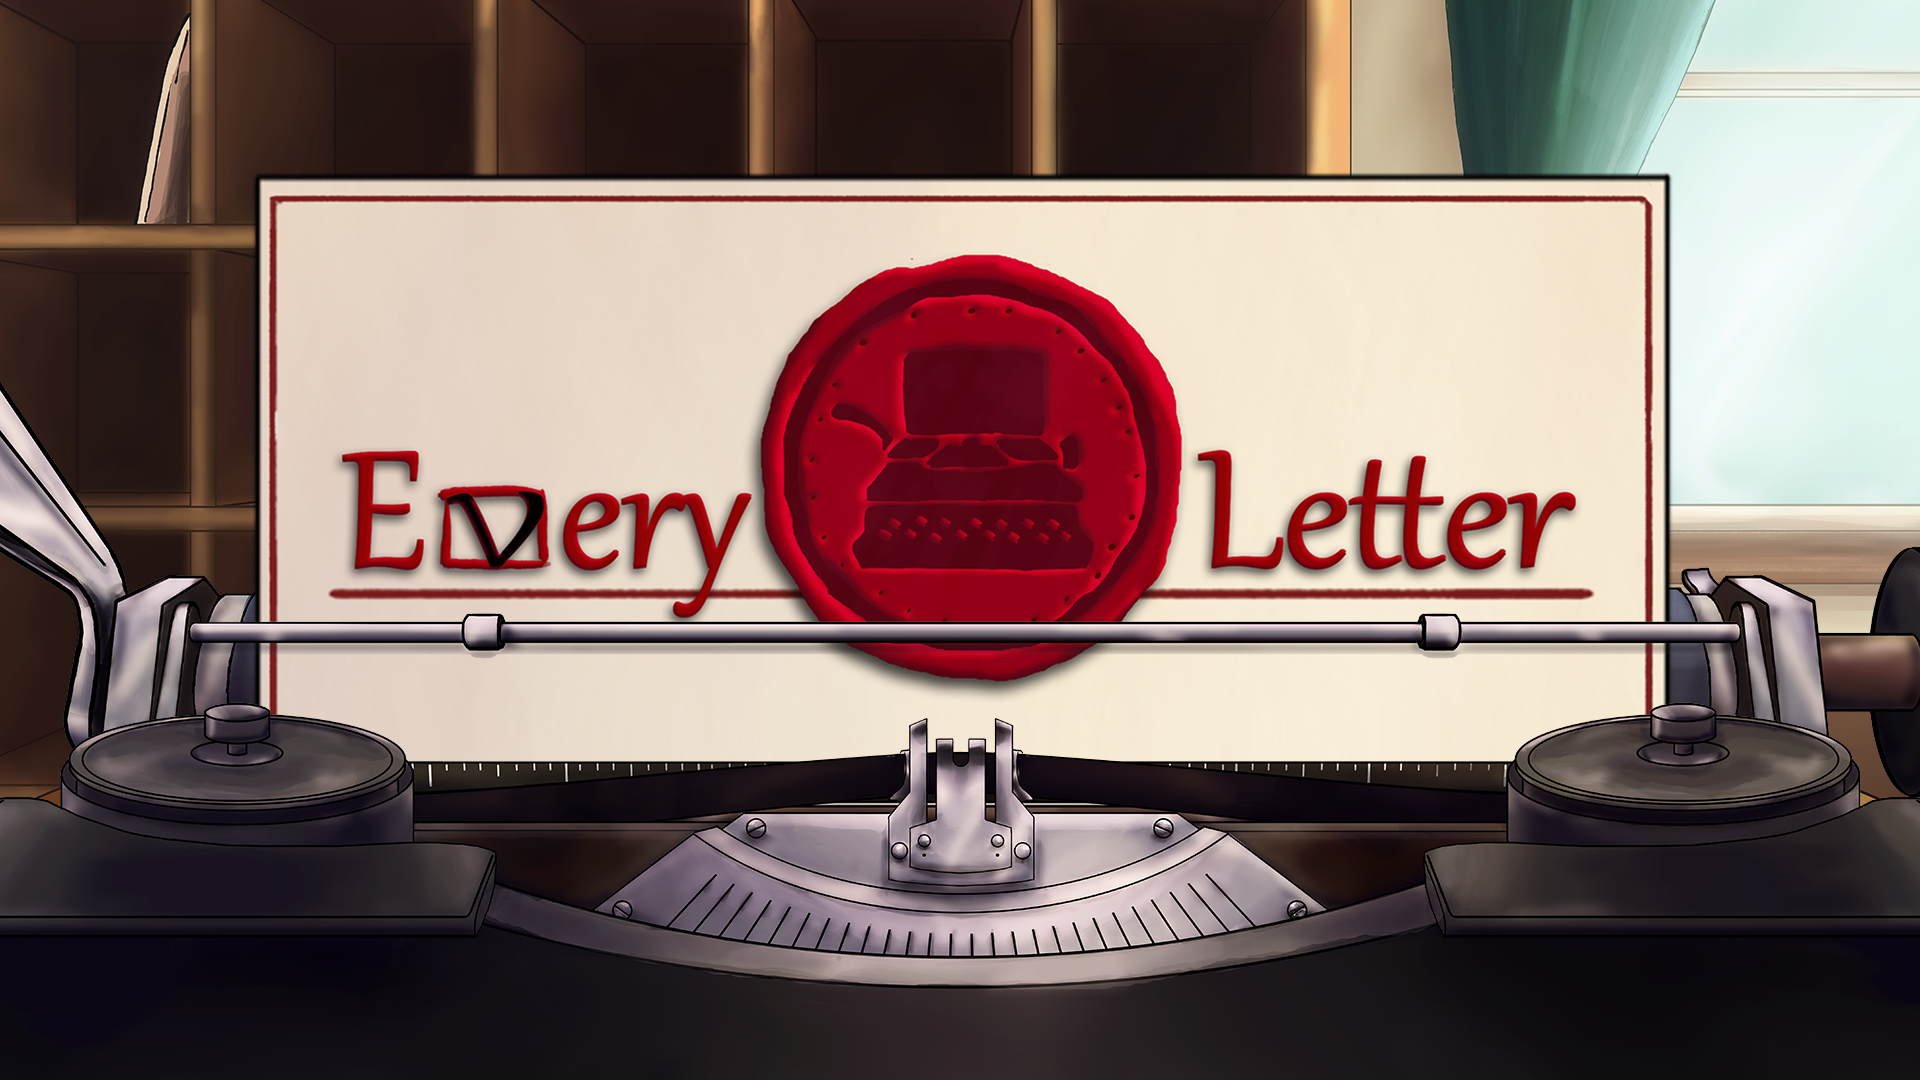 - A promotional image for Every Letter